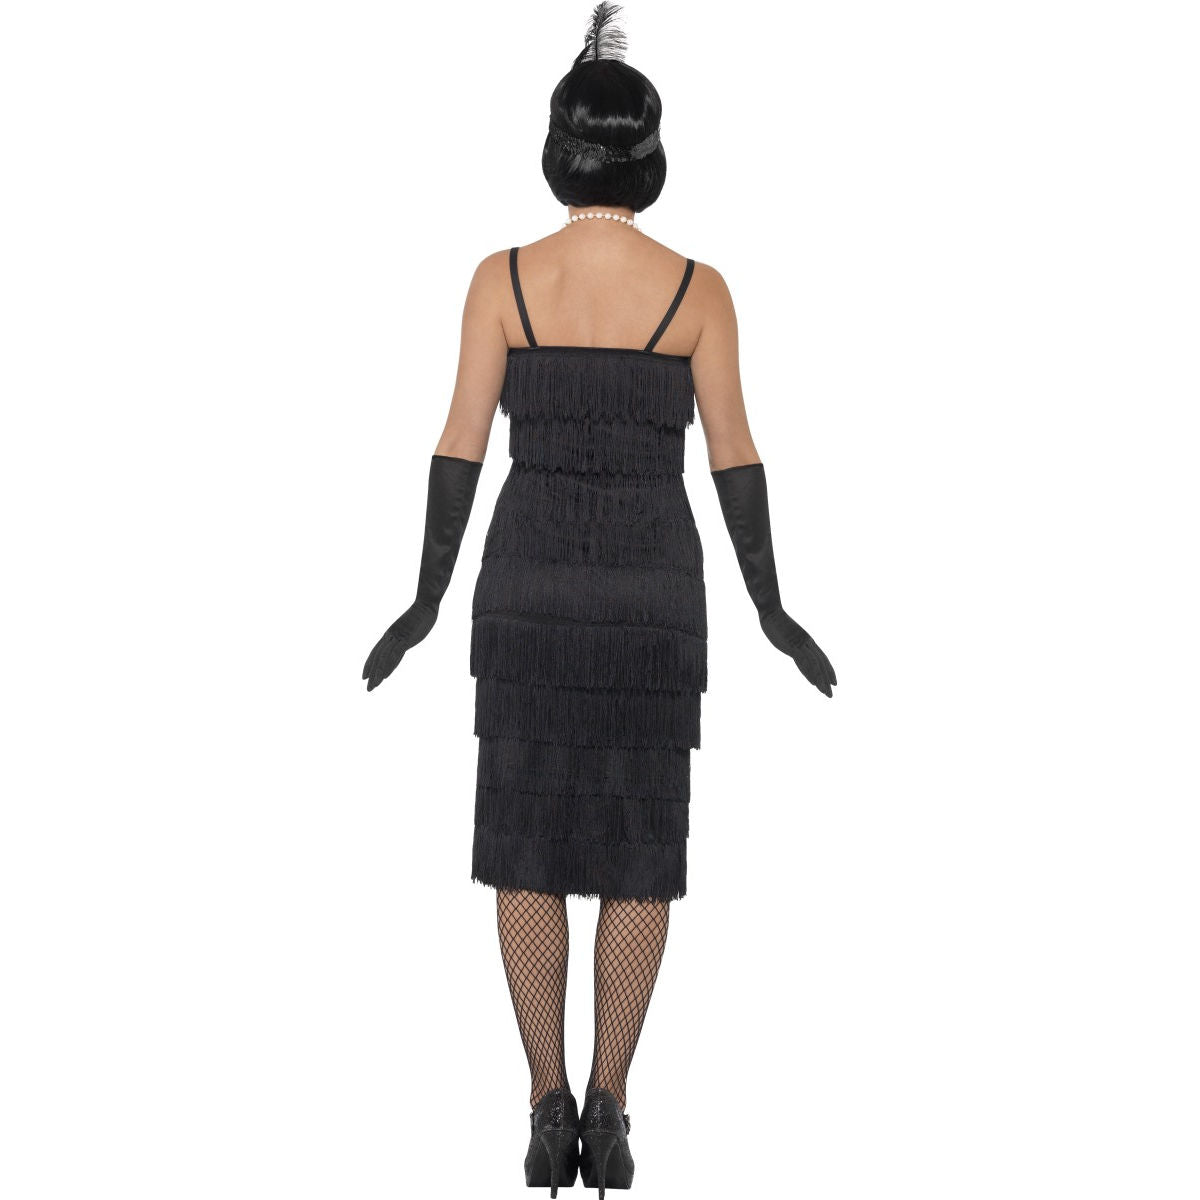 Plus Size Black Glamour Gatsby Flapper Costume with Gloves and Headpiece